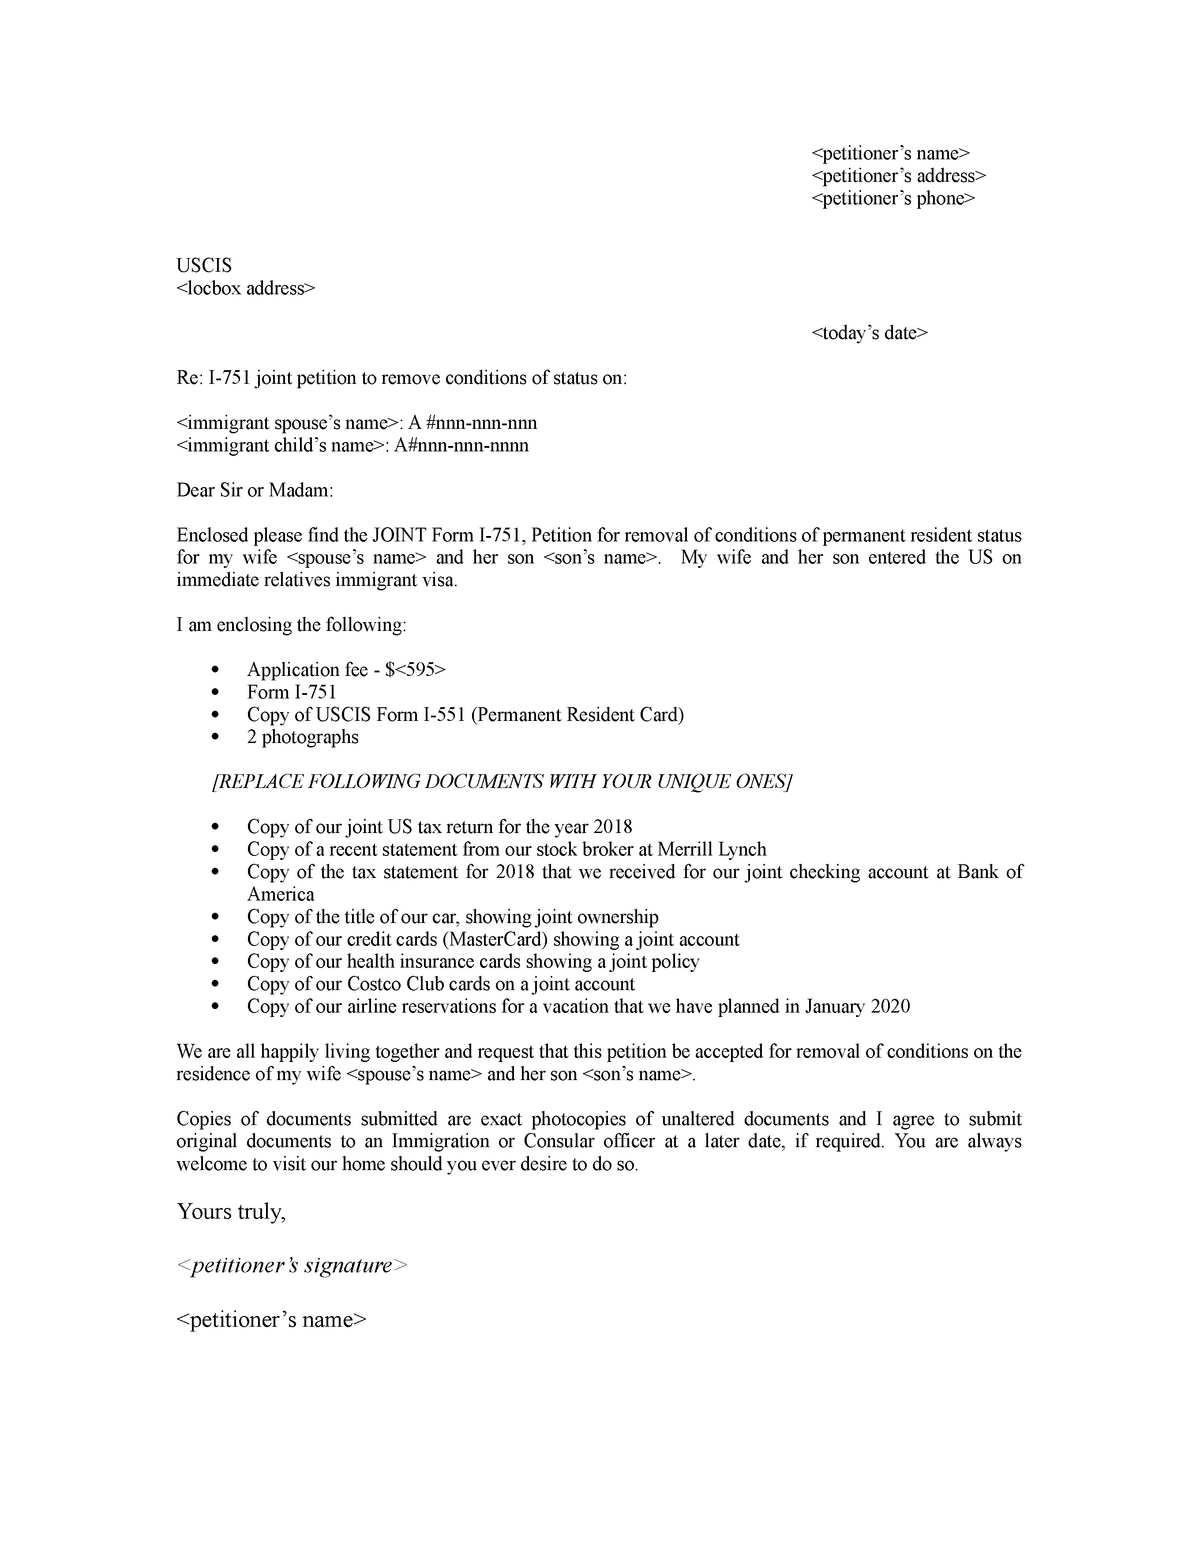 cover letter 1 751